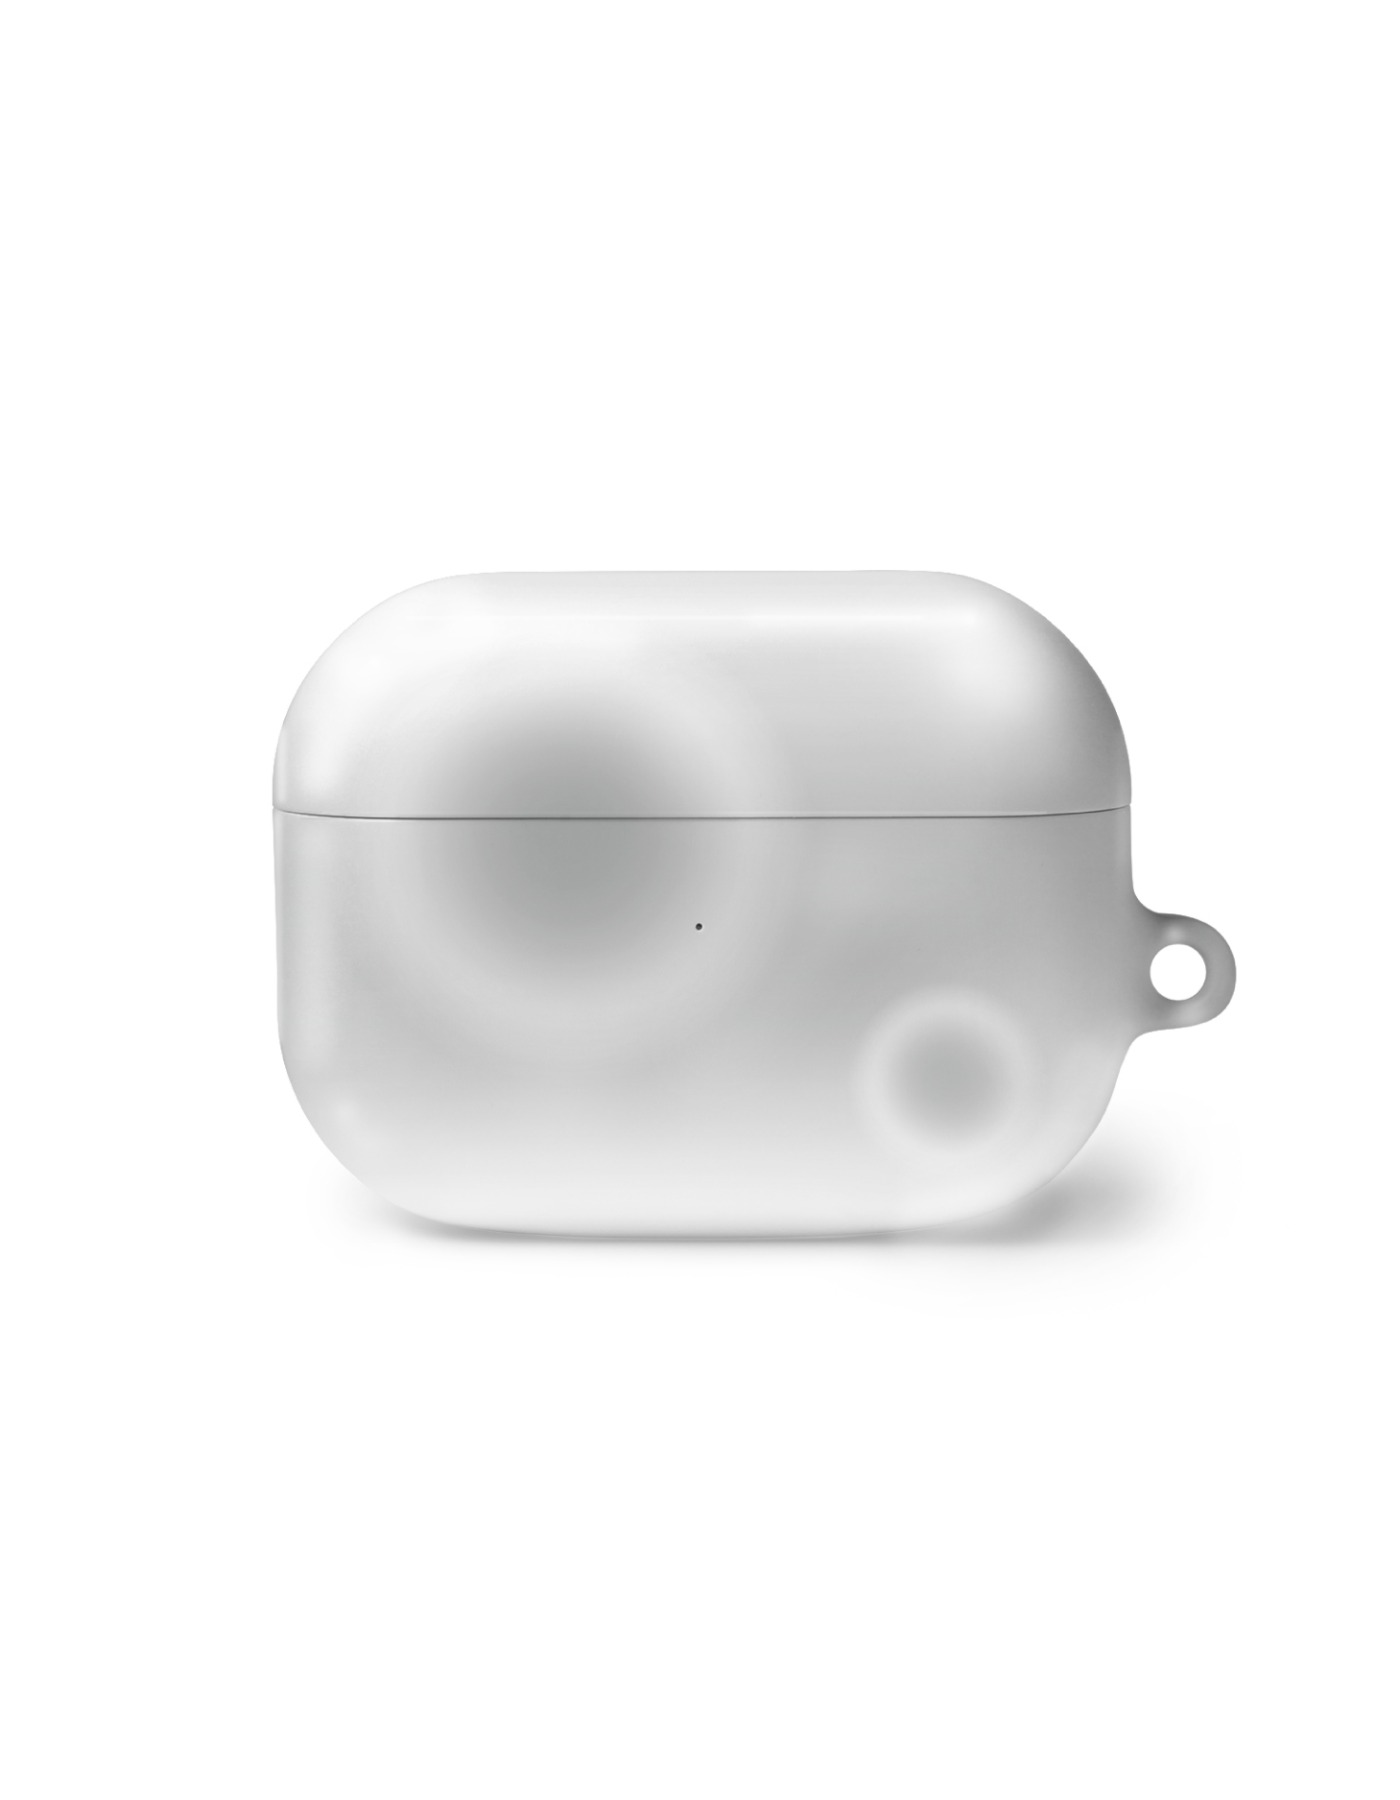 Spread Twins Light Gray AirPods Case (Light Gray+White)